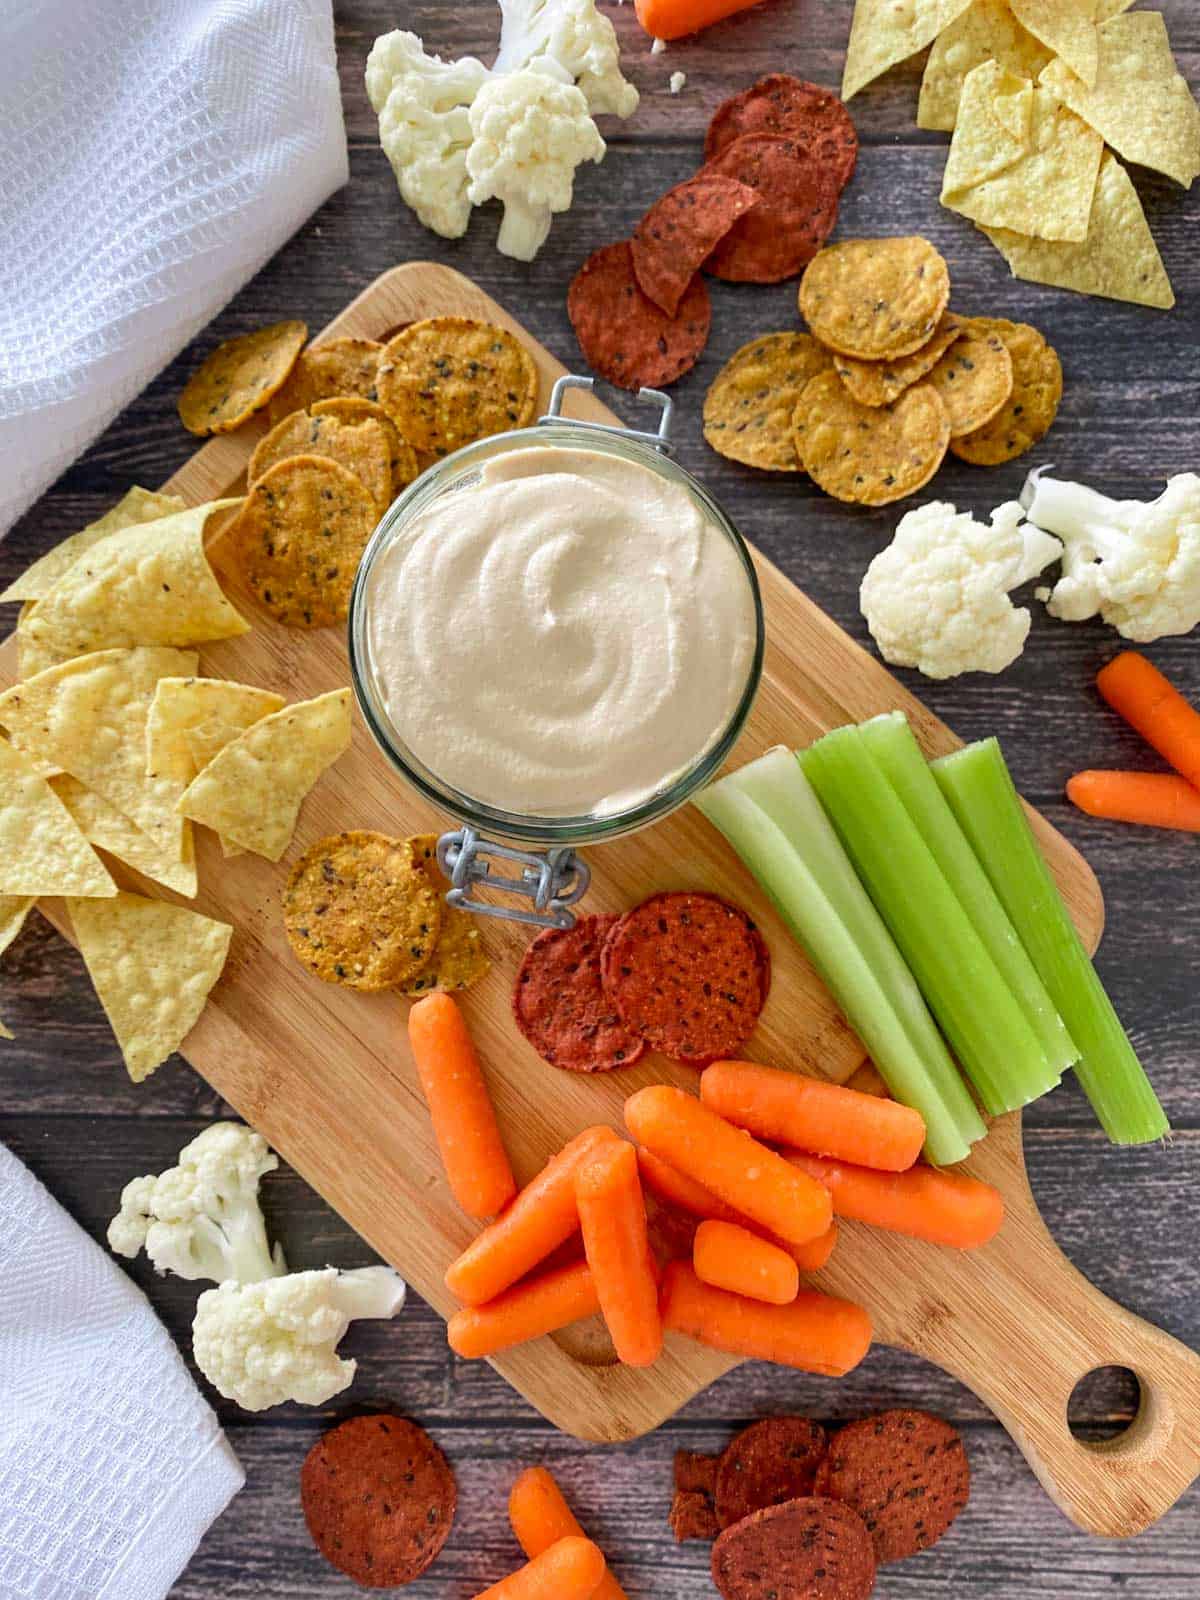 Cutting board with crackers and veggies on top and glass container of vegan cheese dip in the center.